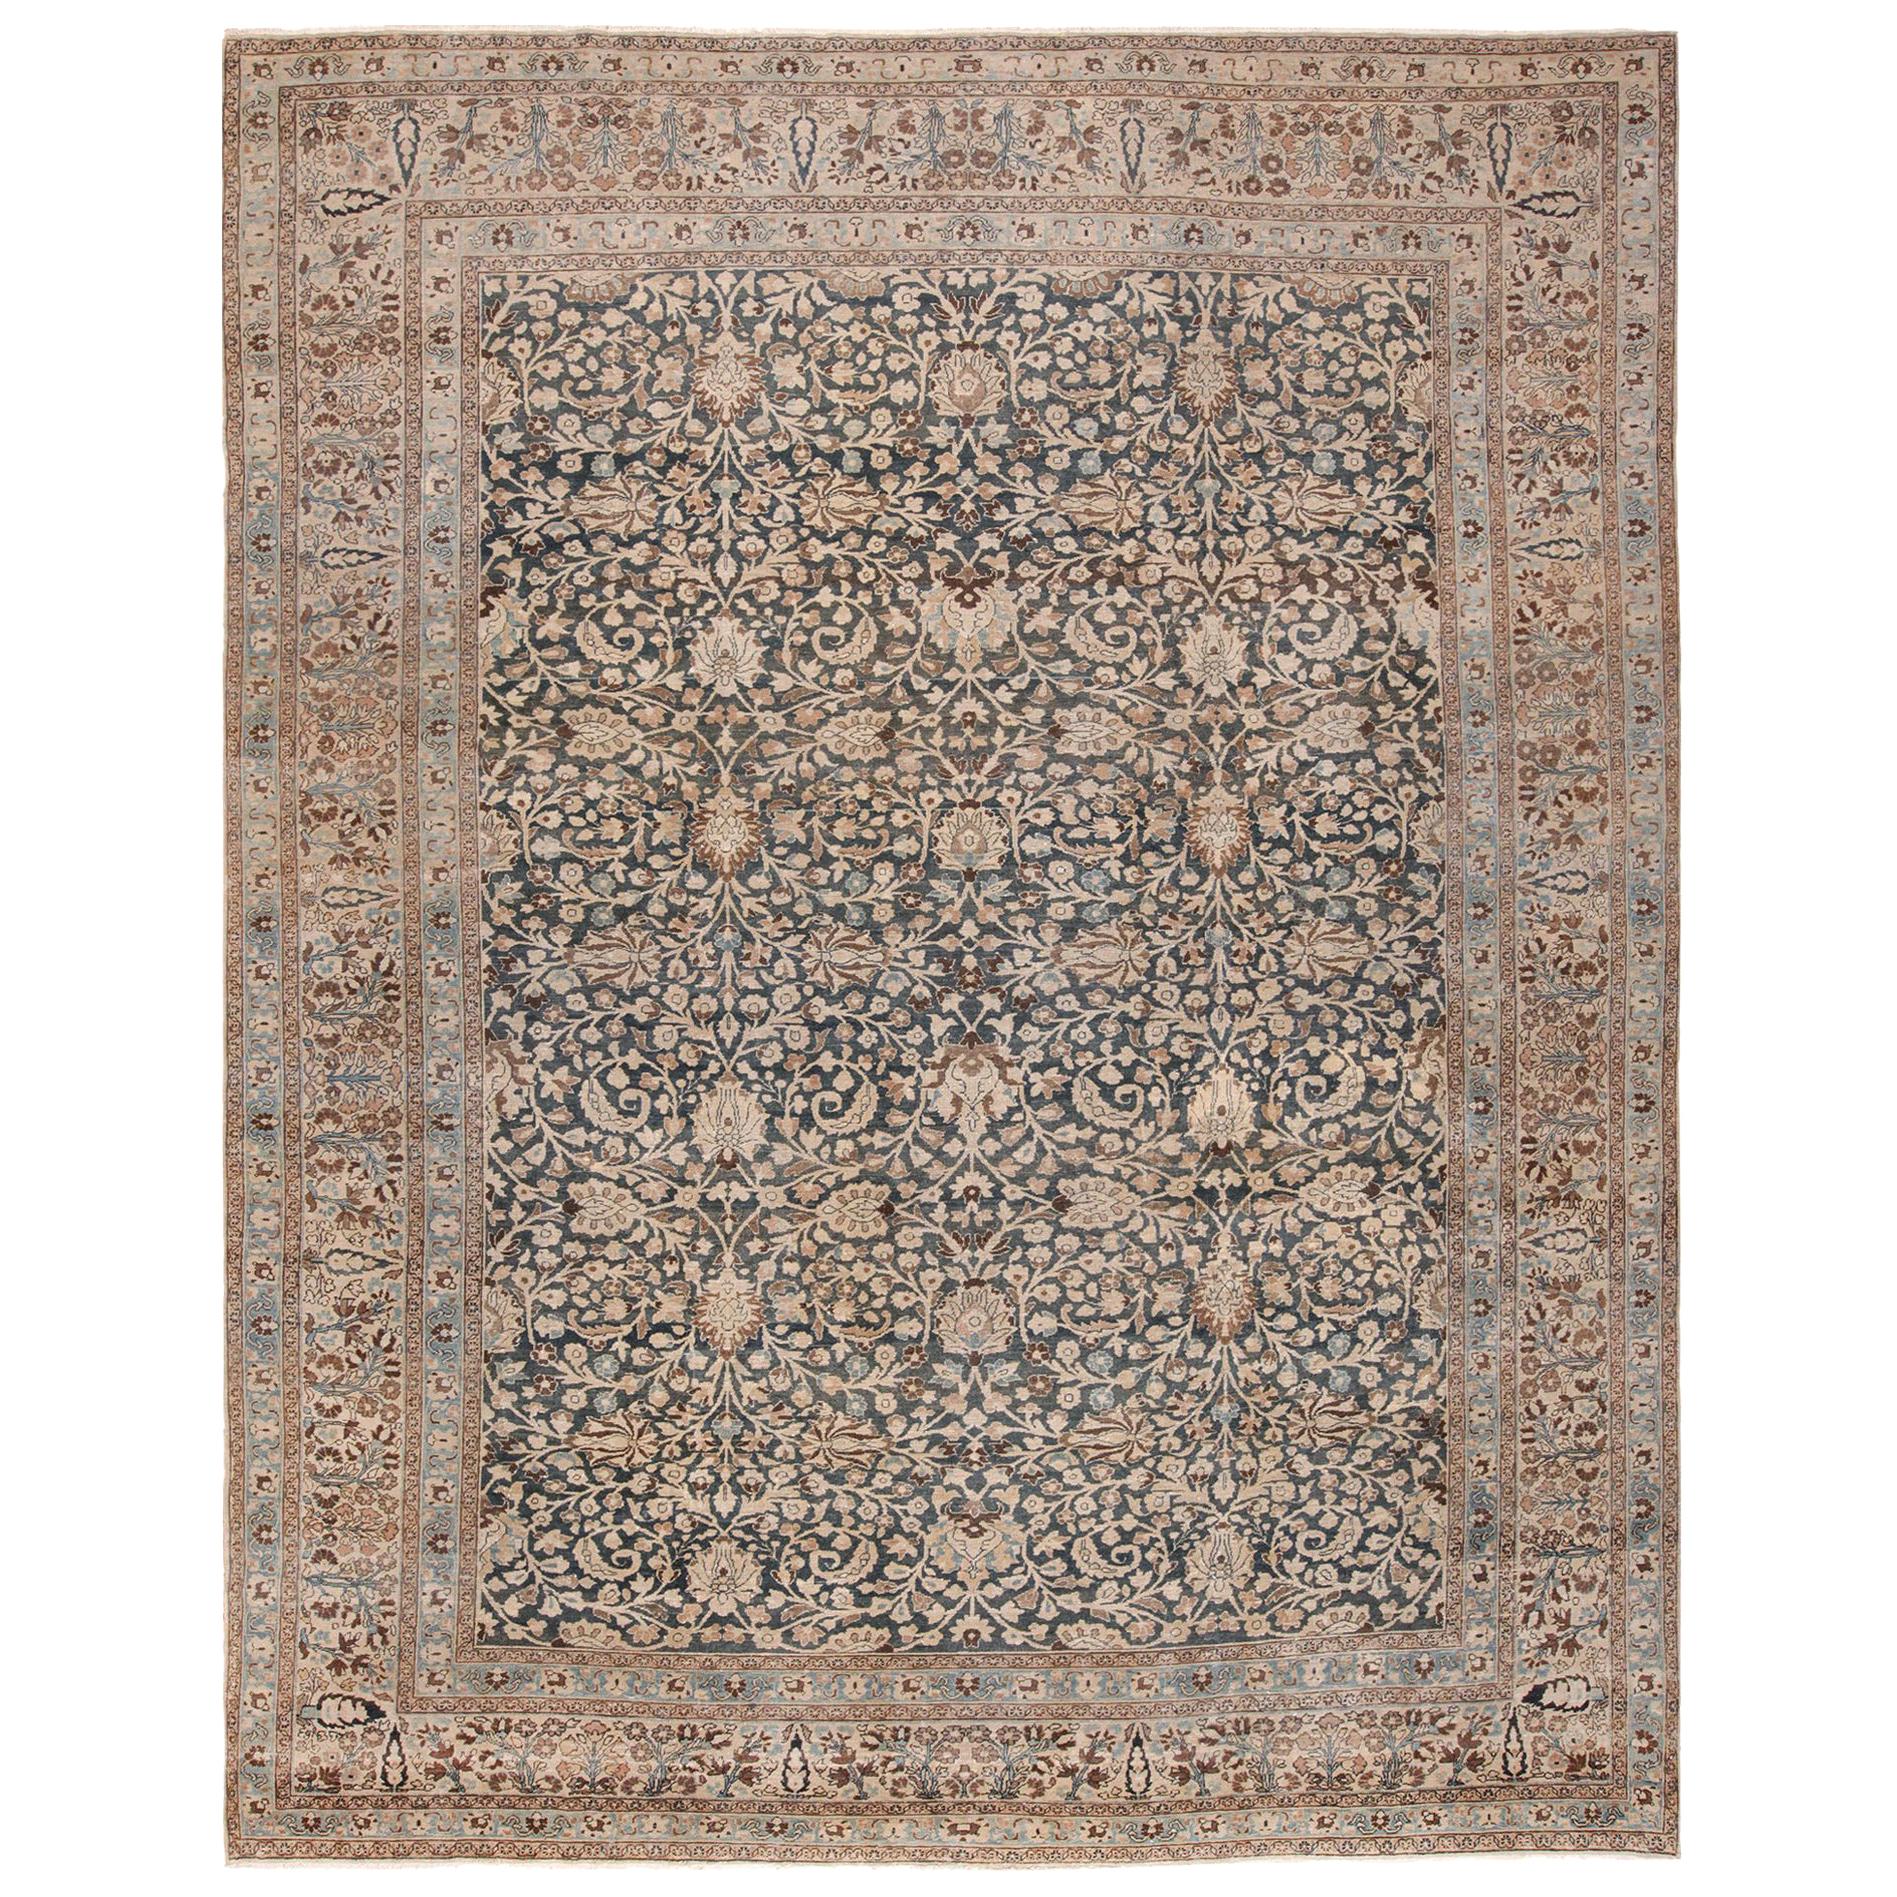 Antique Grey Background Khorassan Persian Rug. Size: 11 ft 4 in x 14 ft 6 in 